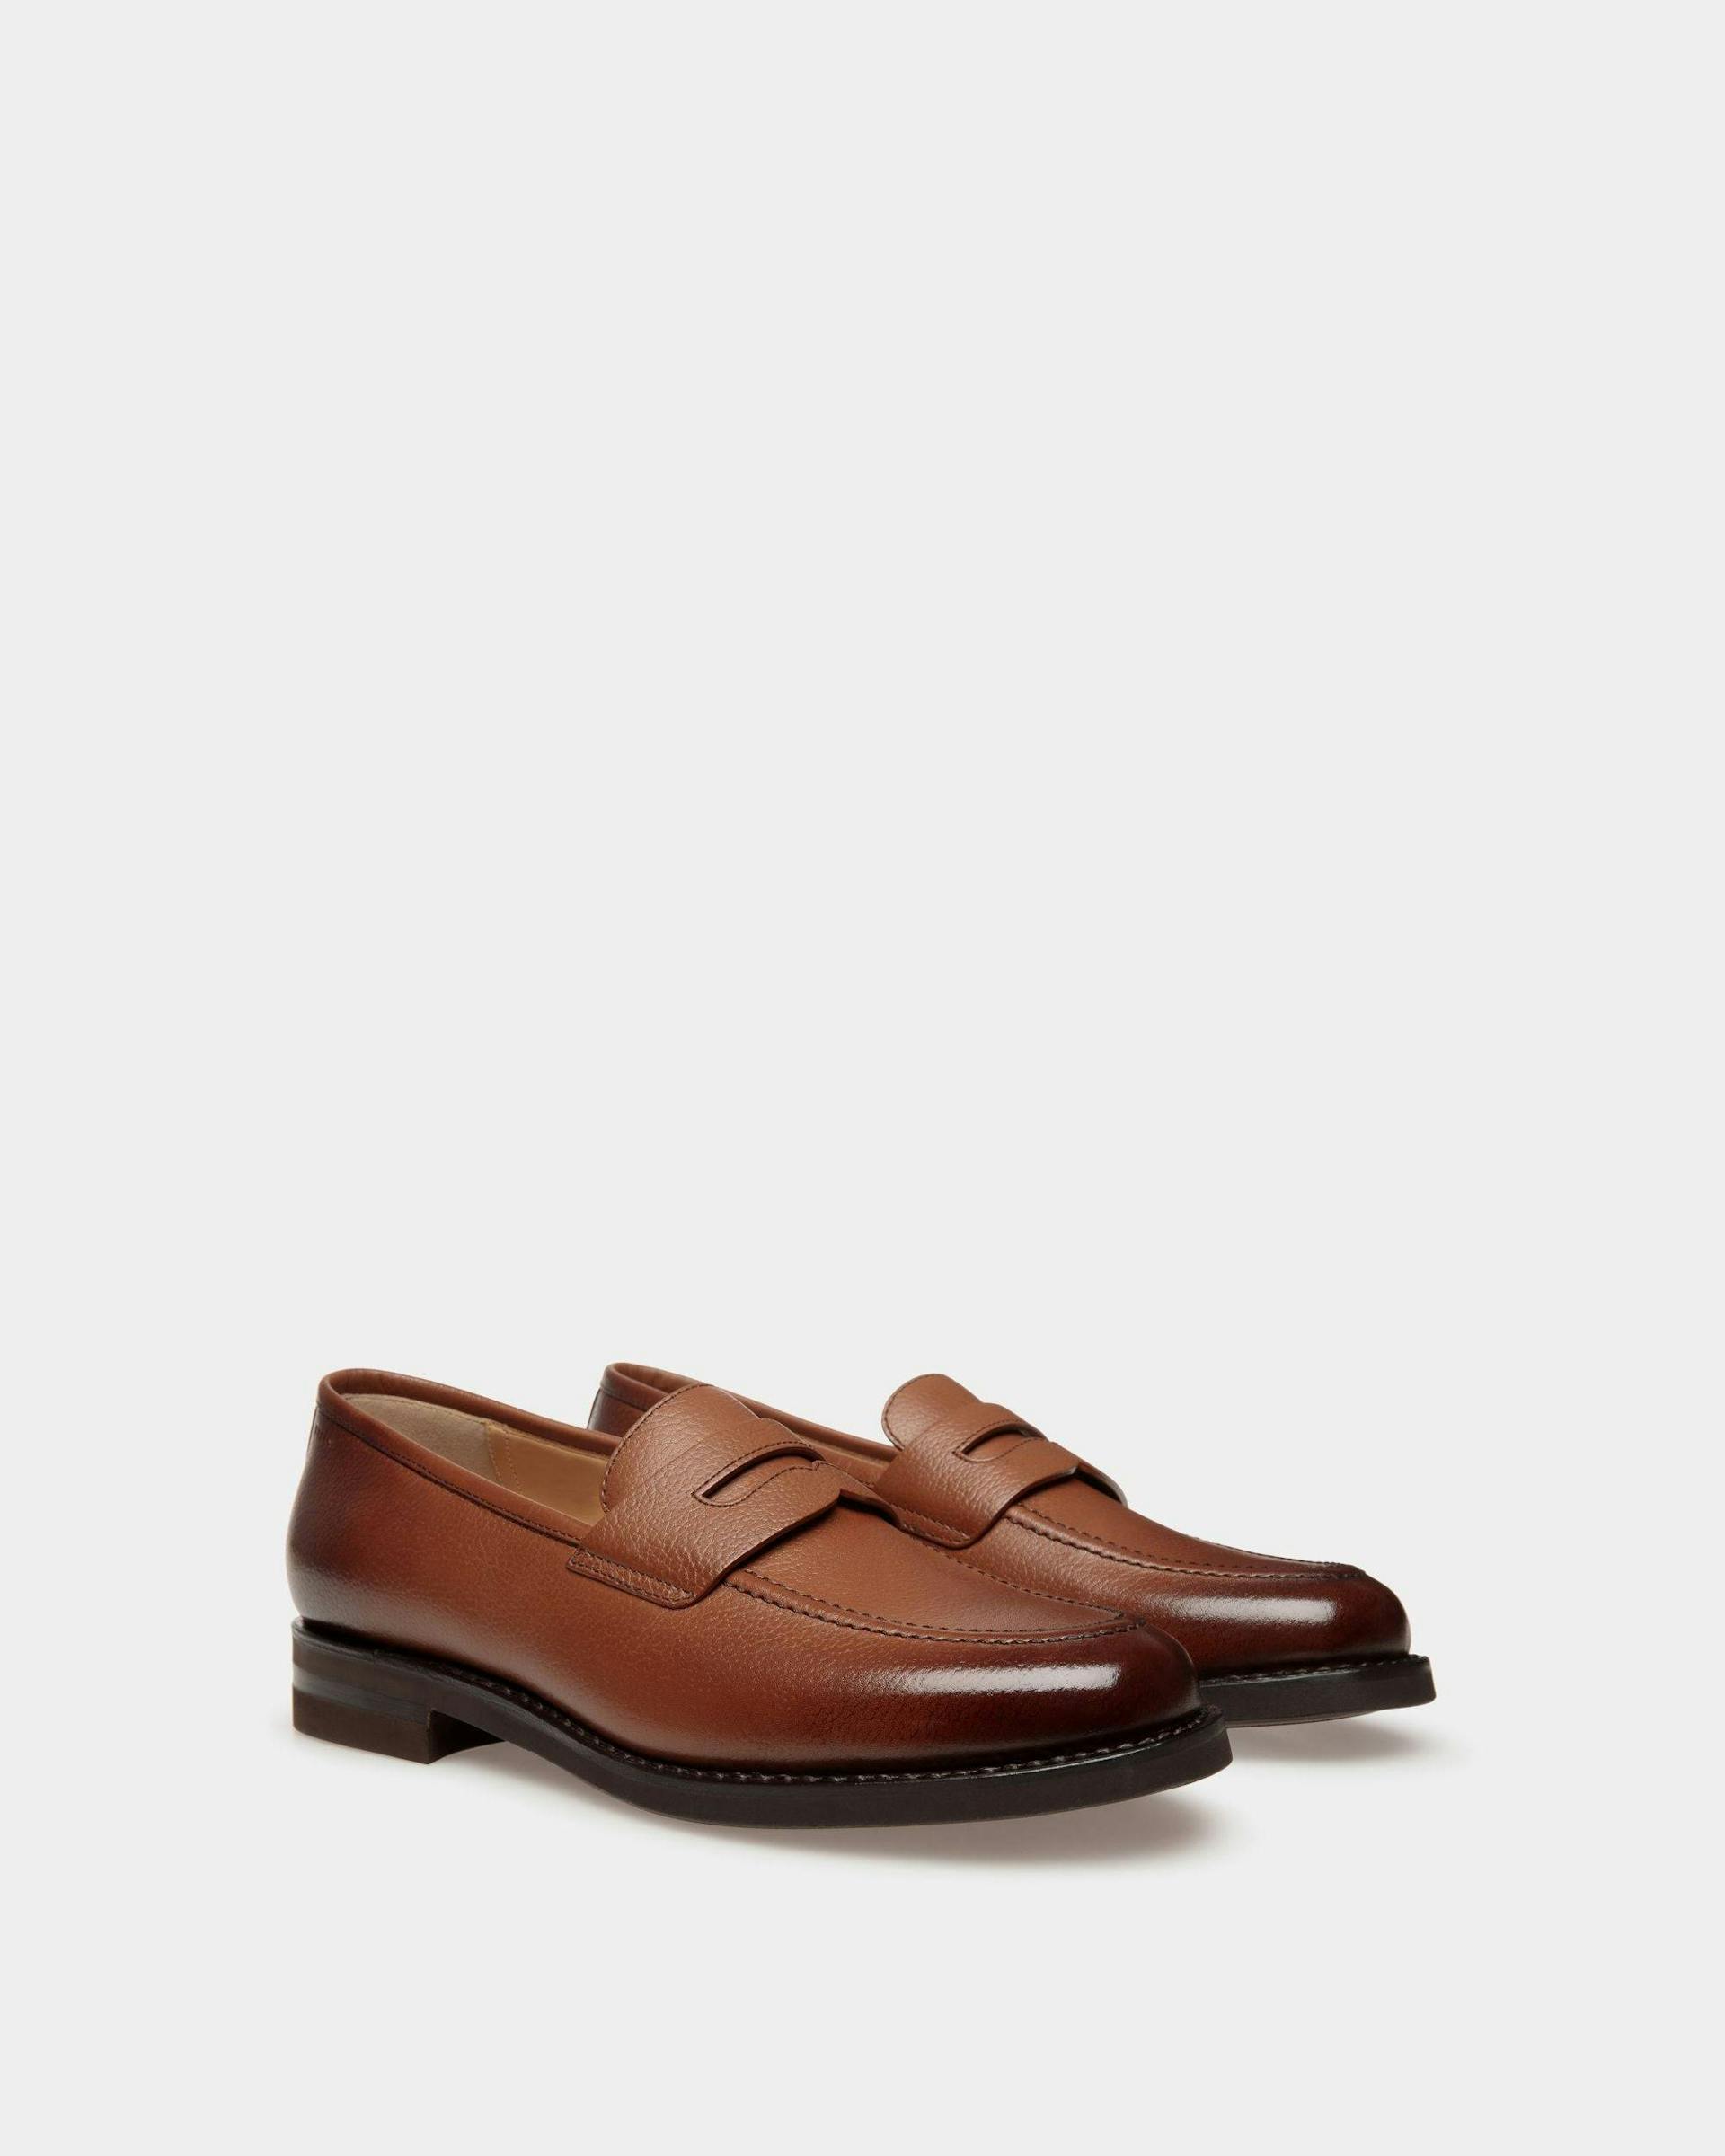 Men's Schoenen Loafer in Embossed Leather | Bally | Still Life 3/4 Front